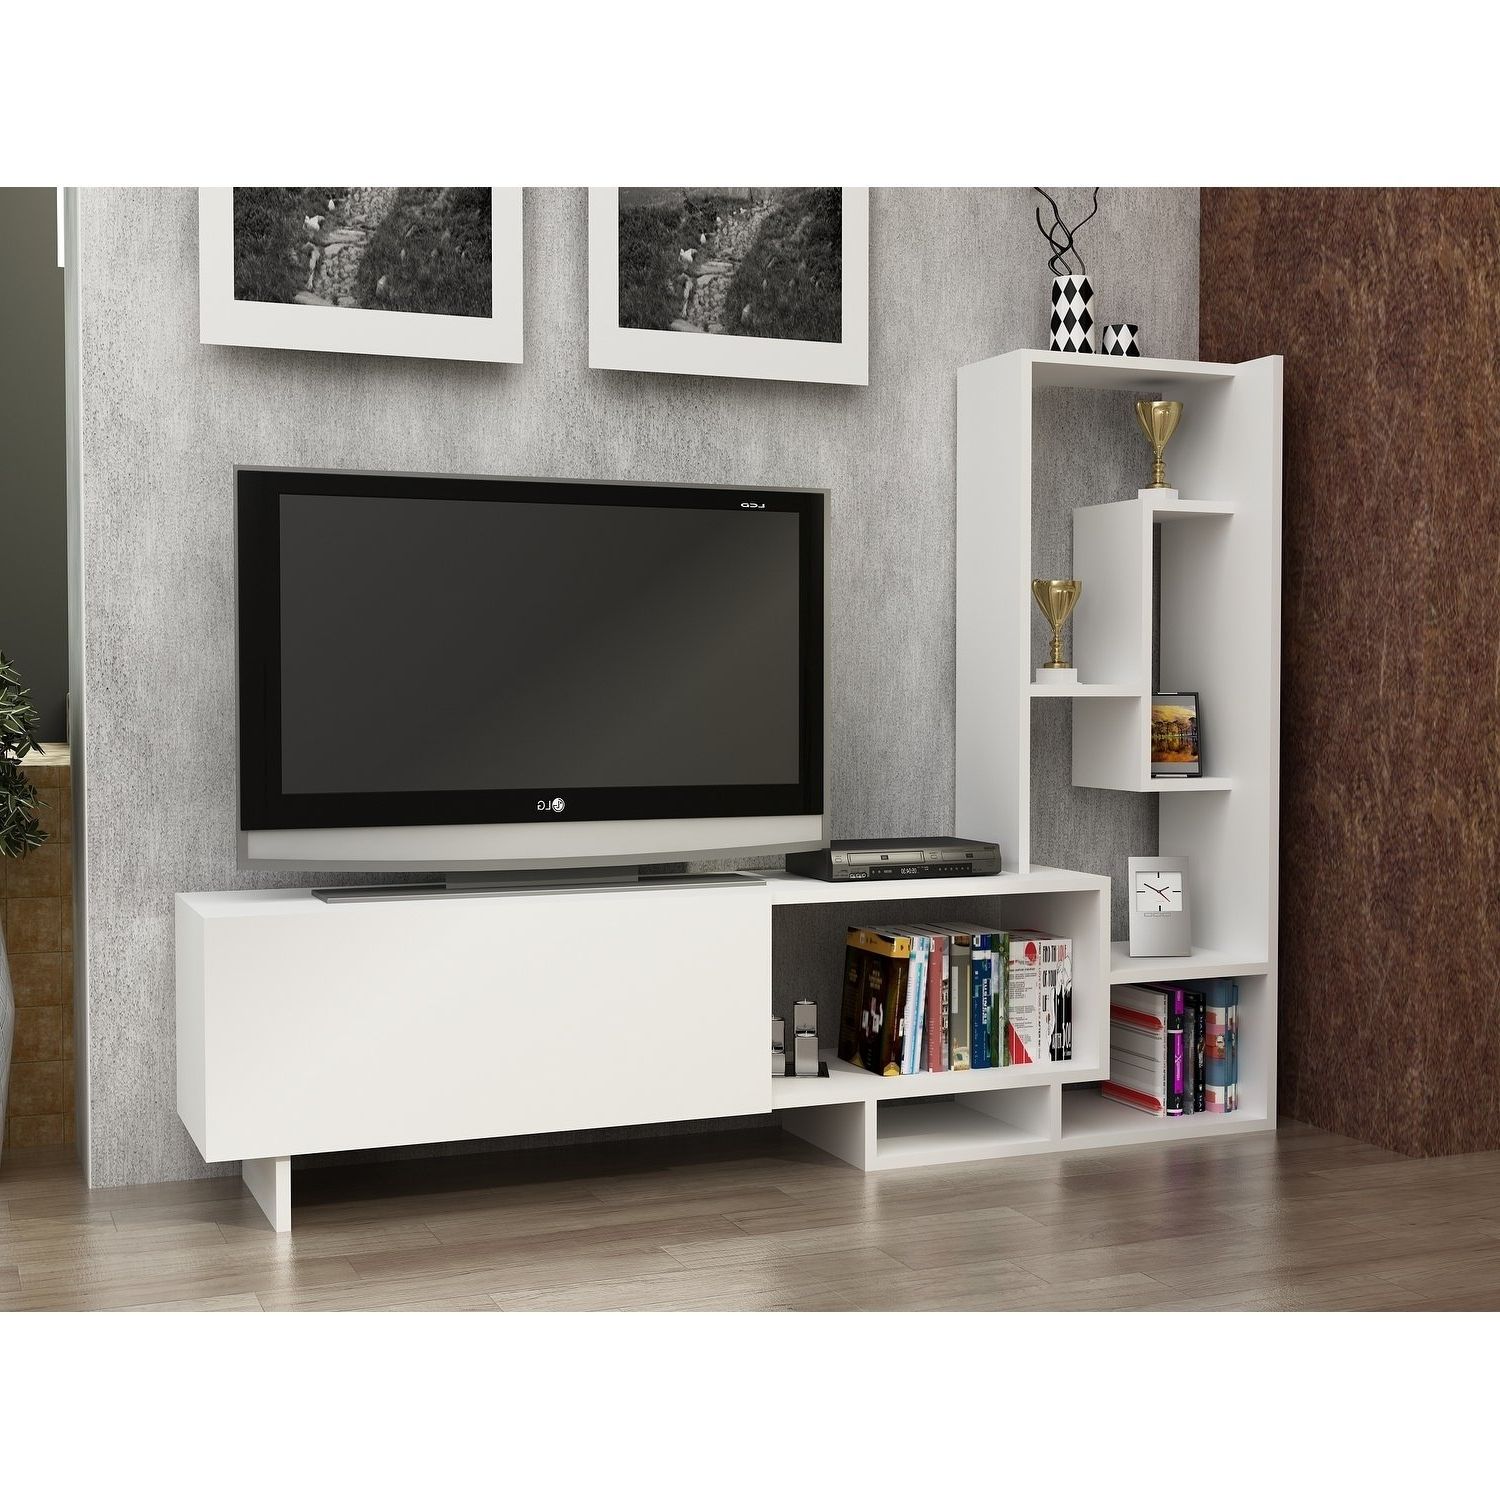 Current Shop Decorotika Pegai White Wood 60 Inch Tv Stand With Bookshelves Intended For Bookshelf And Tv Stands (View 18 of 20)